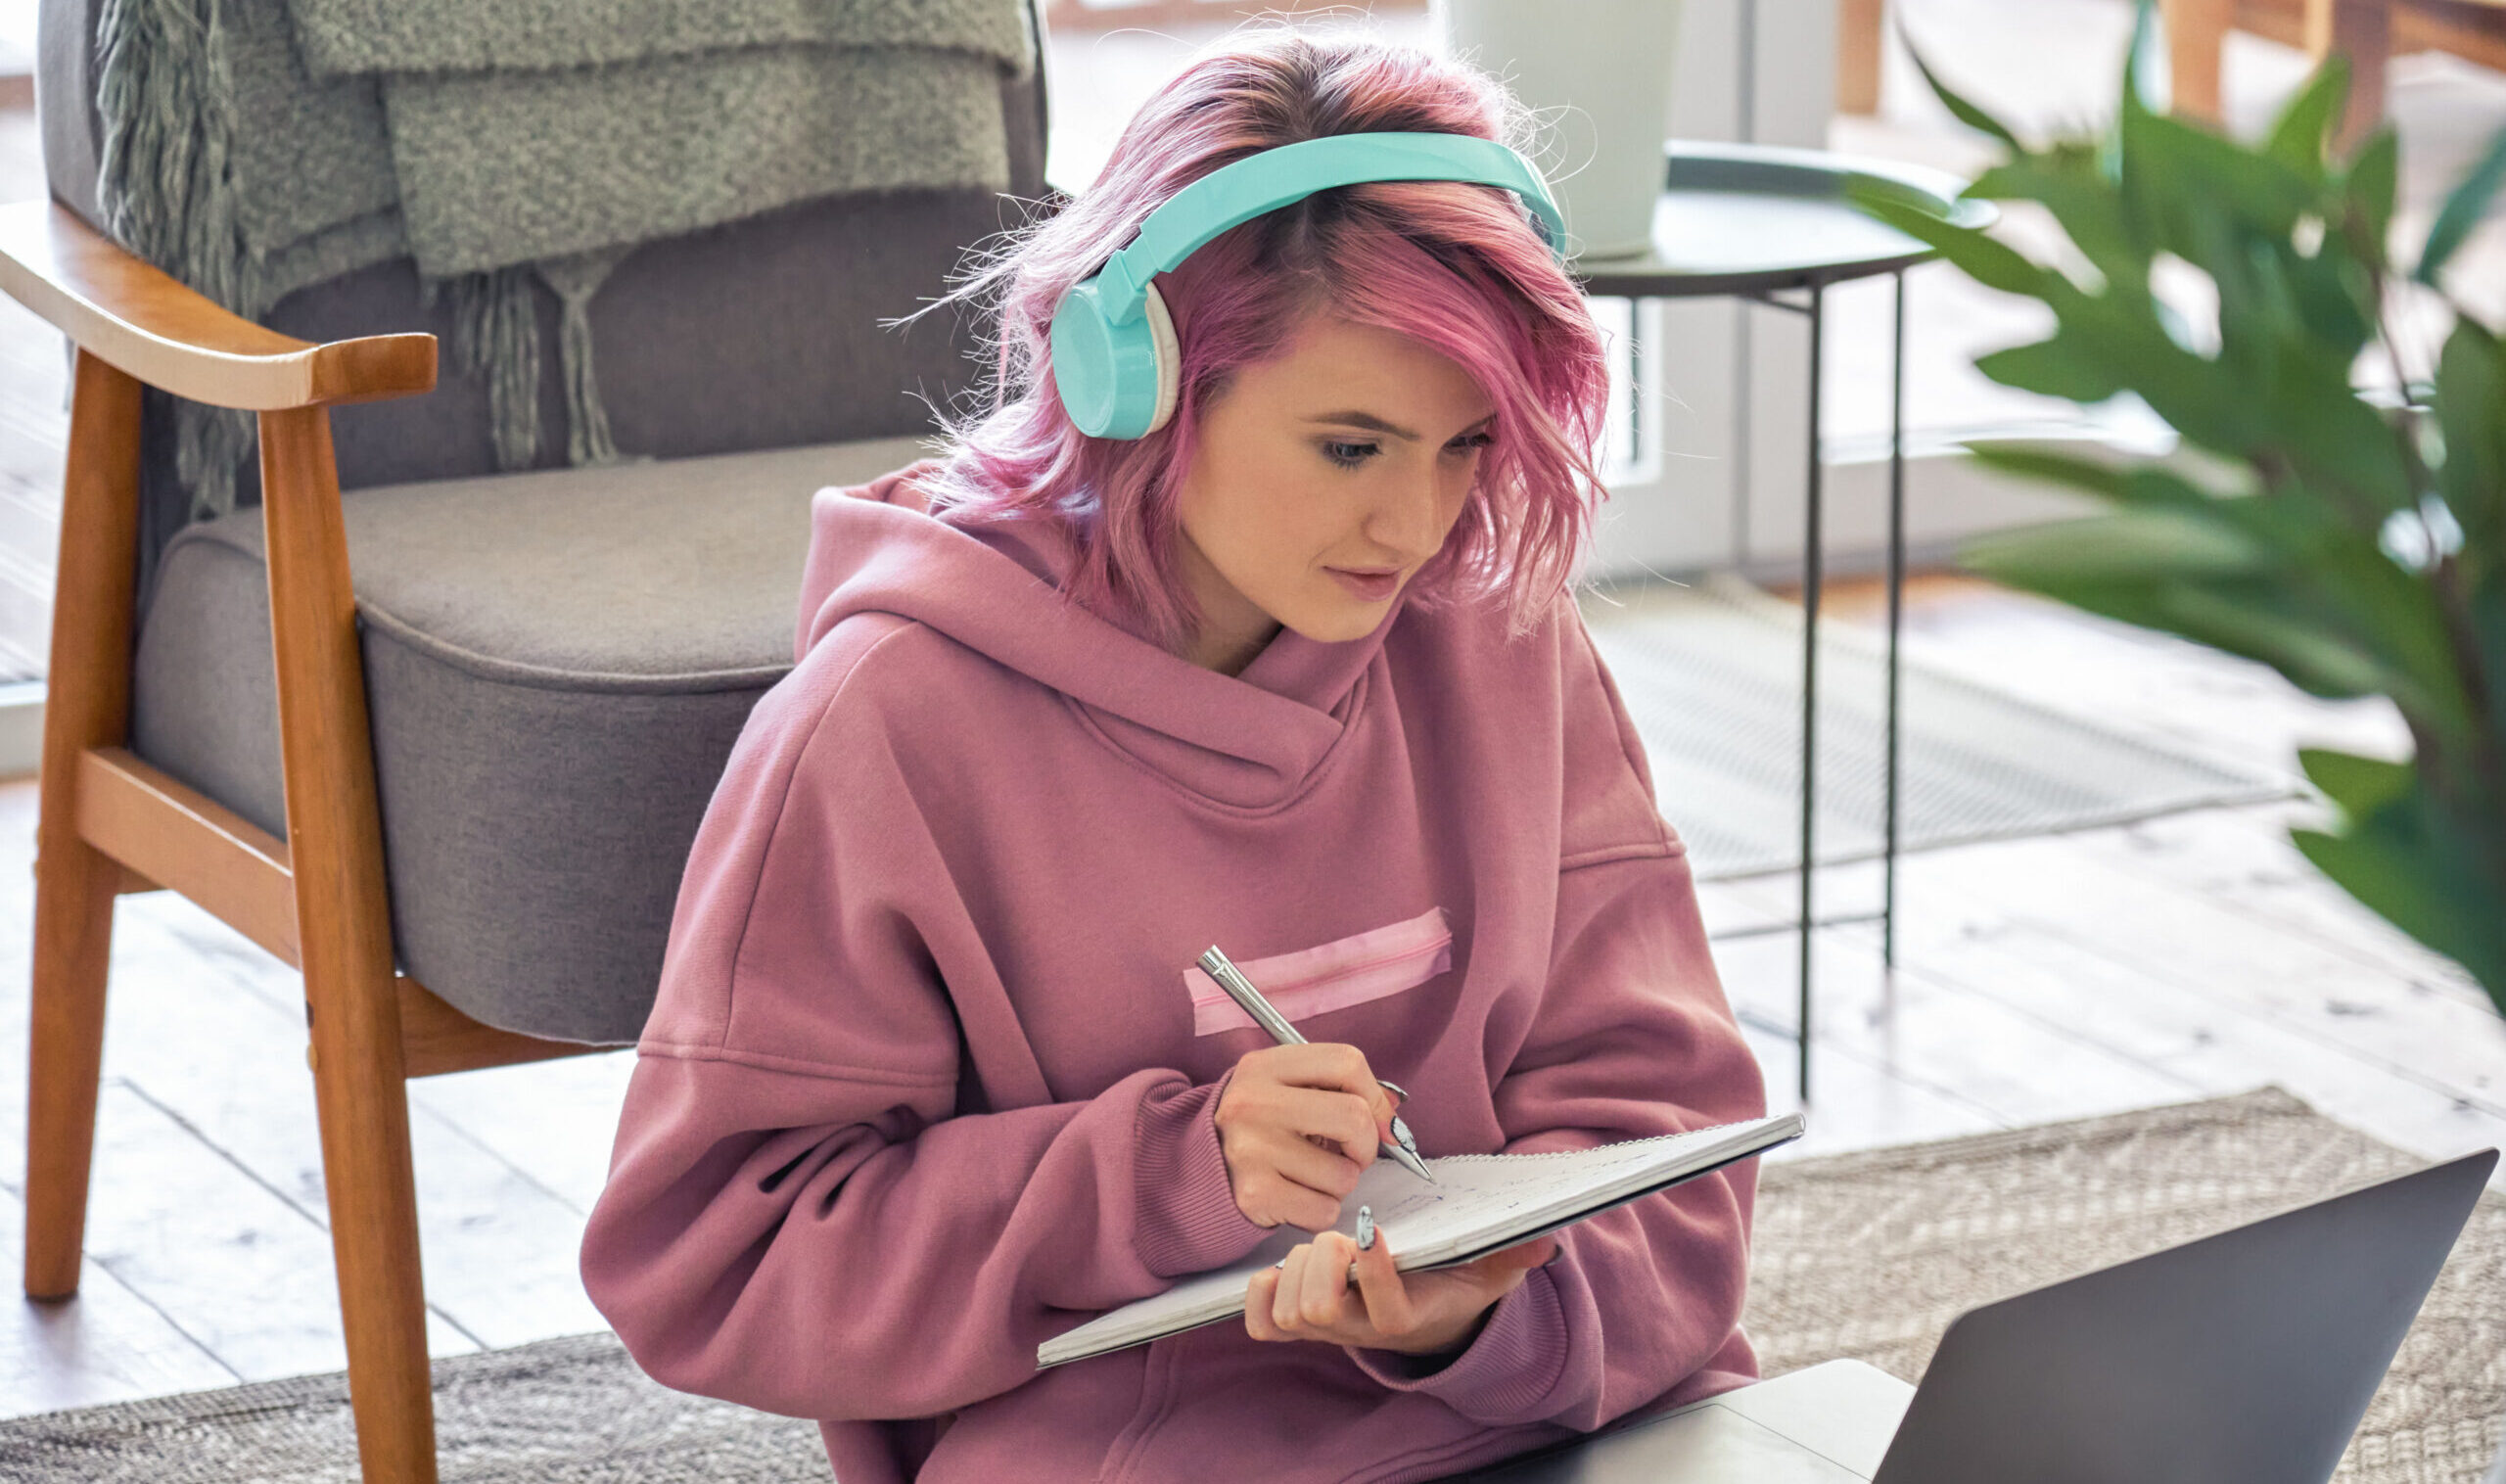 the photo shows a teenage girl with pink hair wearing blue headphones and a pink hoodie, she is holding a pen and textbook while looking at a laptop